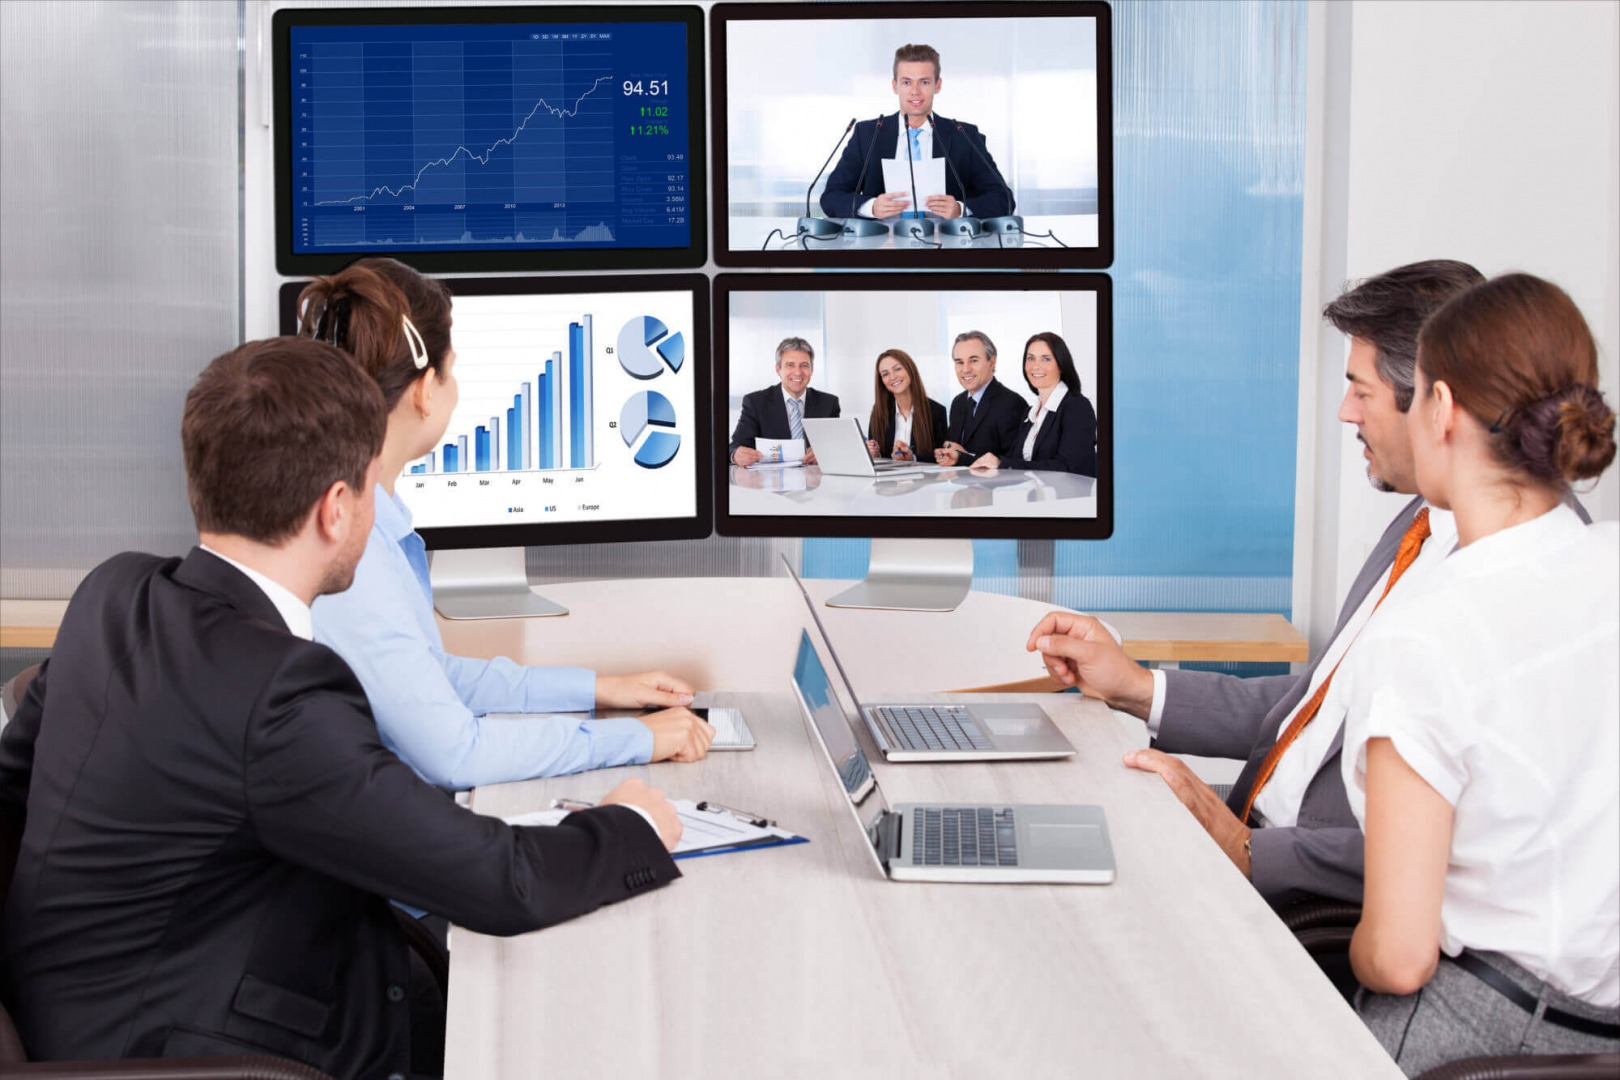 Projecting Leadership Presence in a Teleconference